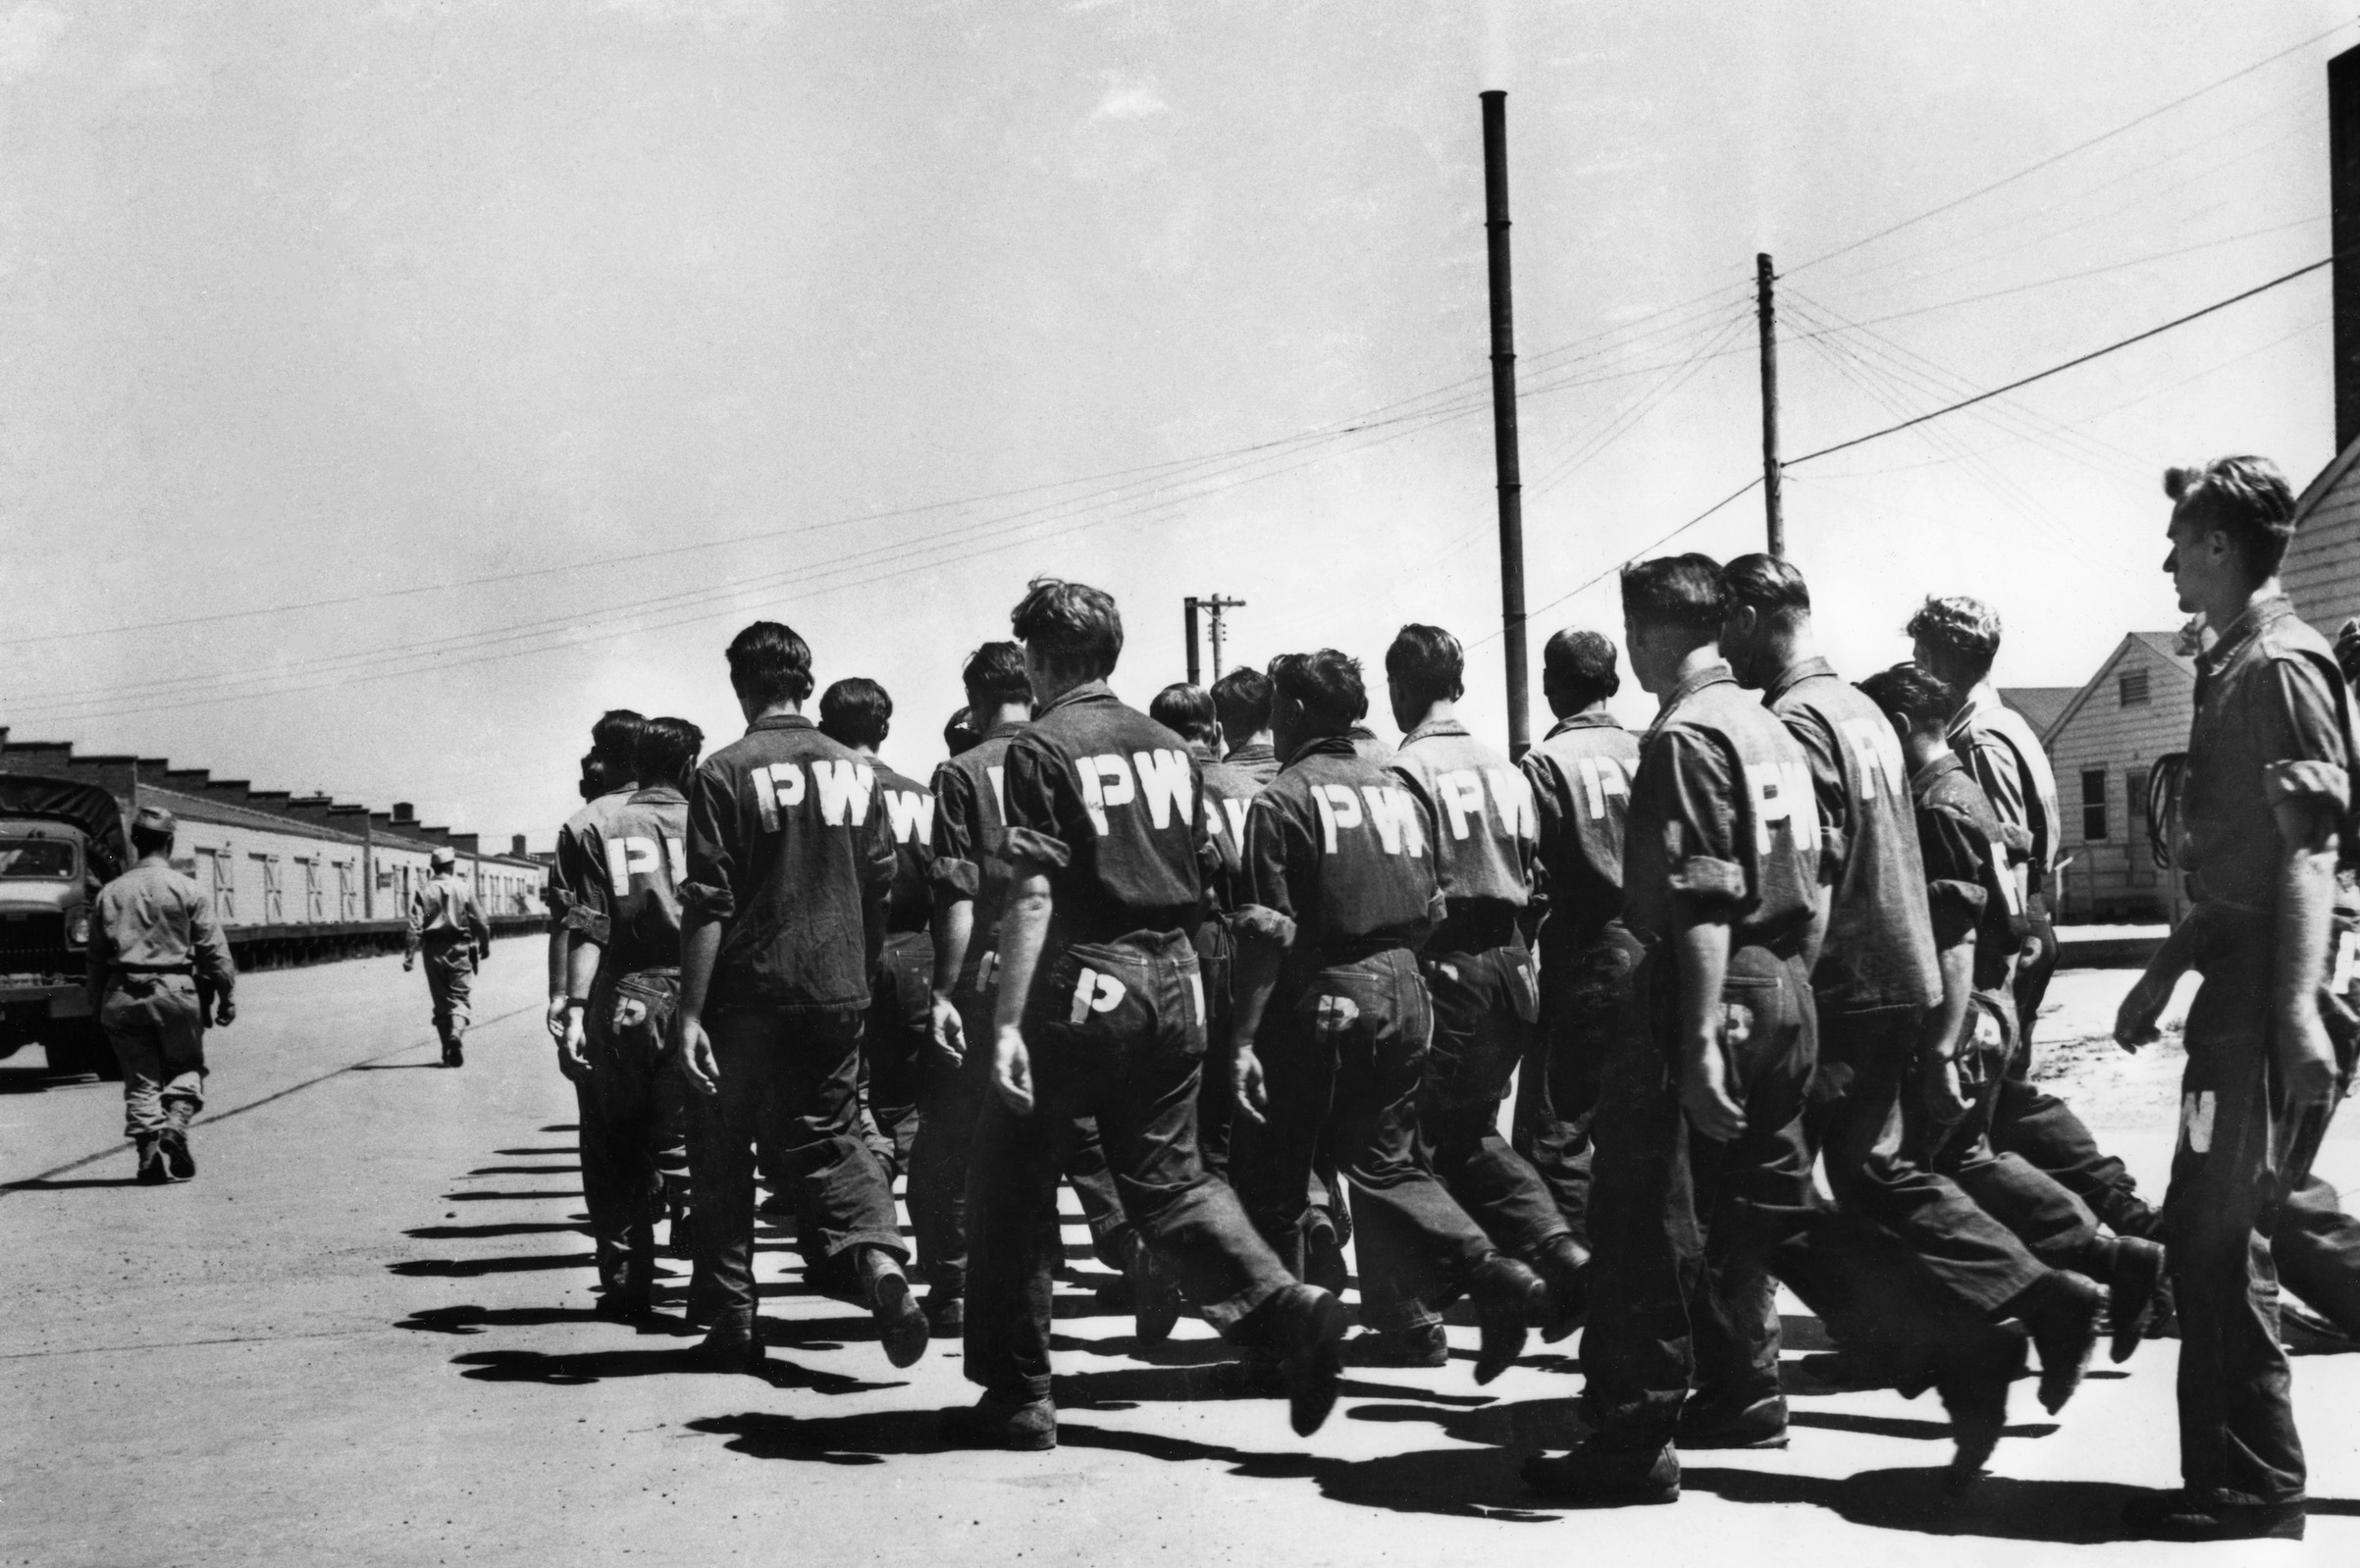 German prisoners at Camp Carson in Colorado sing as they march to the camp laundry in 1943 (Bettmann Archive/Getty Images)